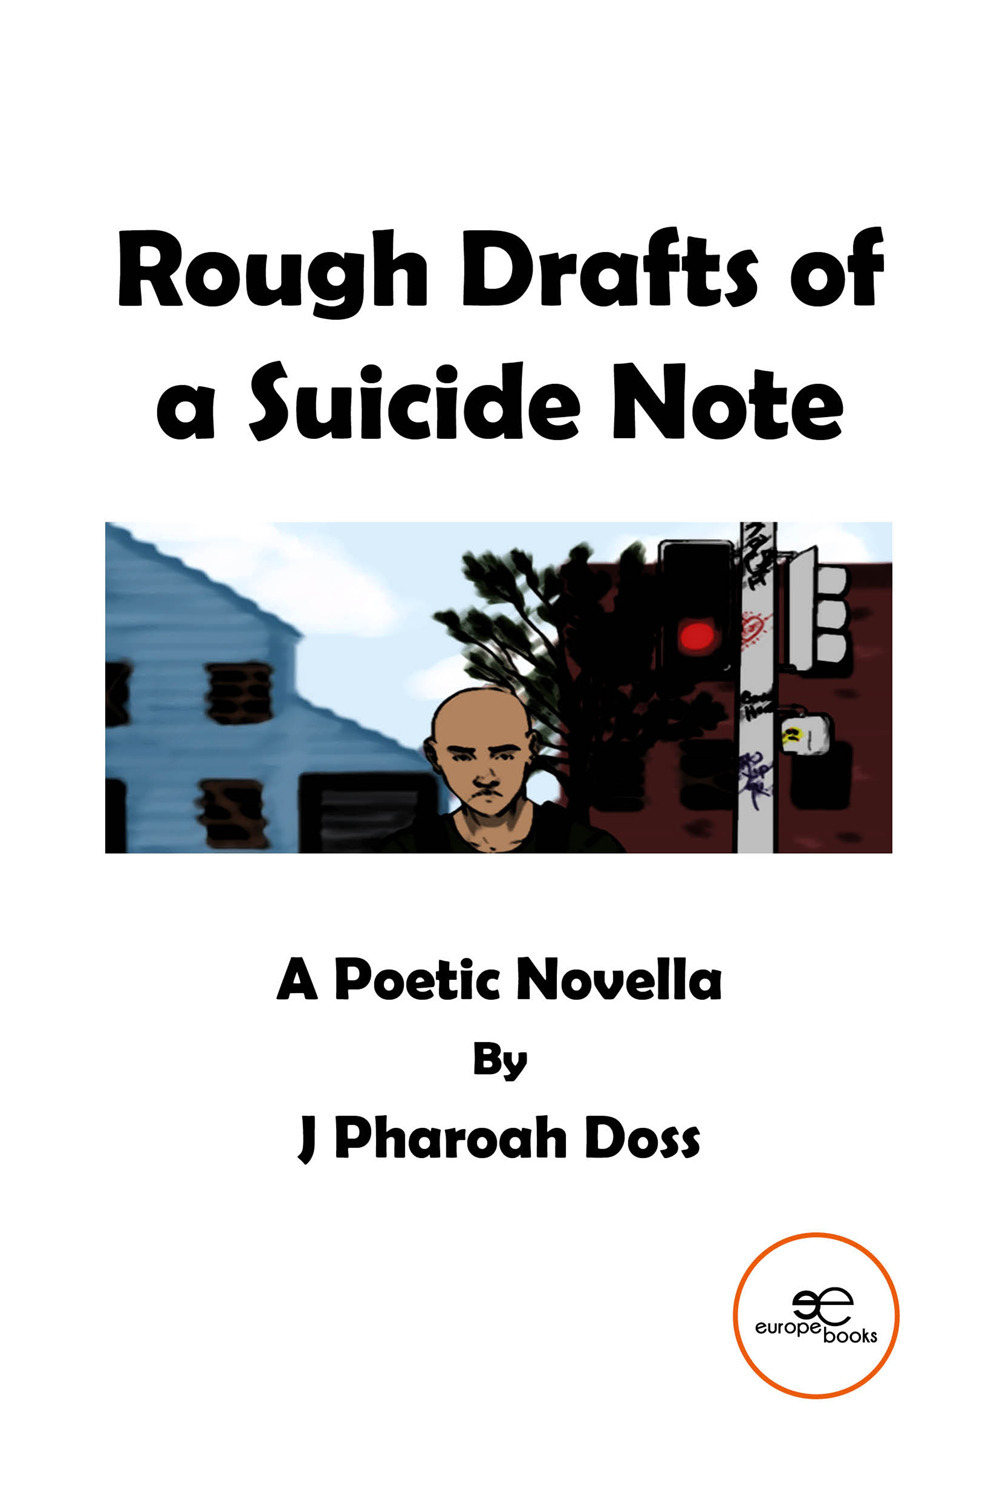 Rough drafts of a suicide note